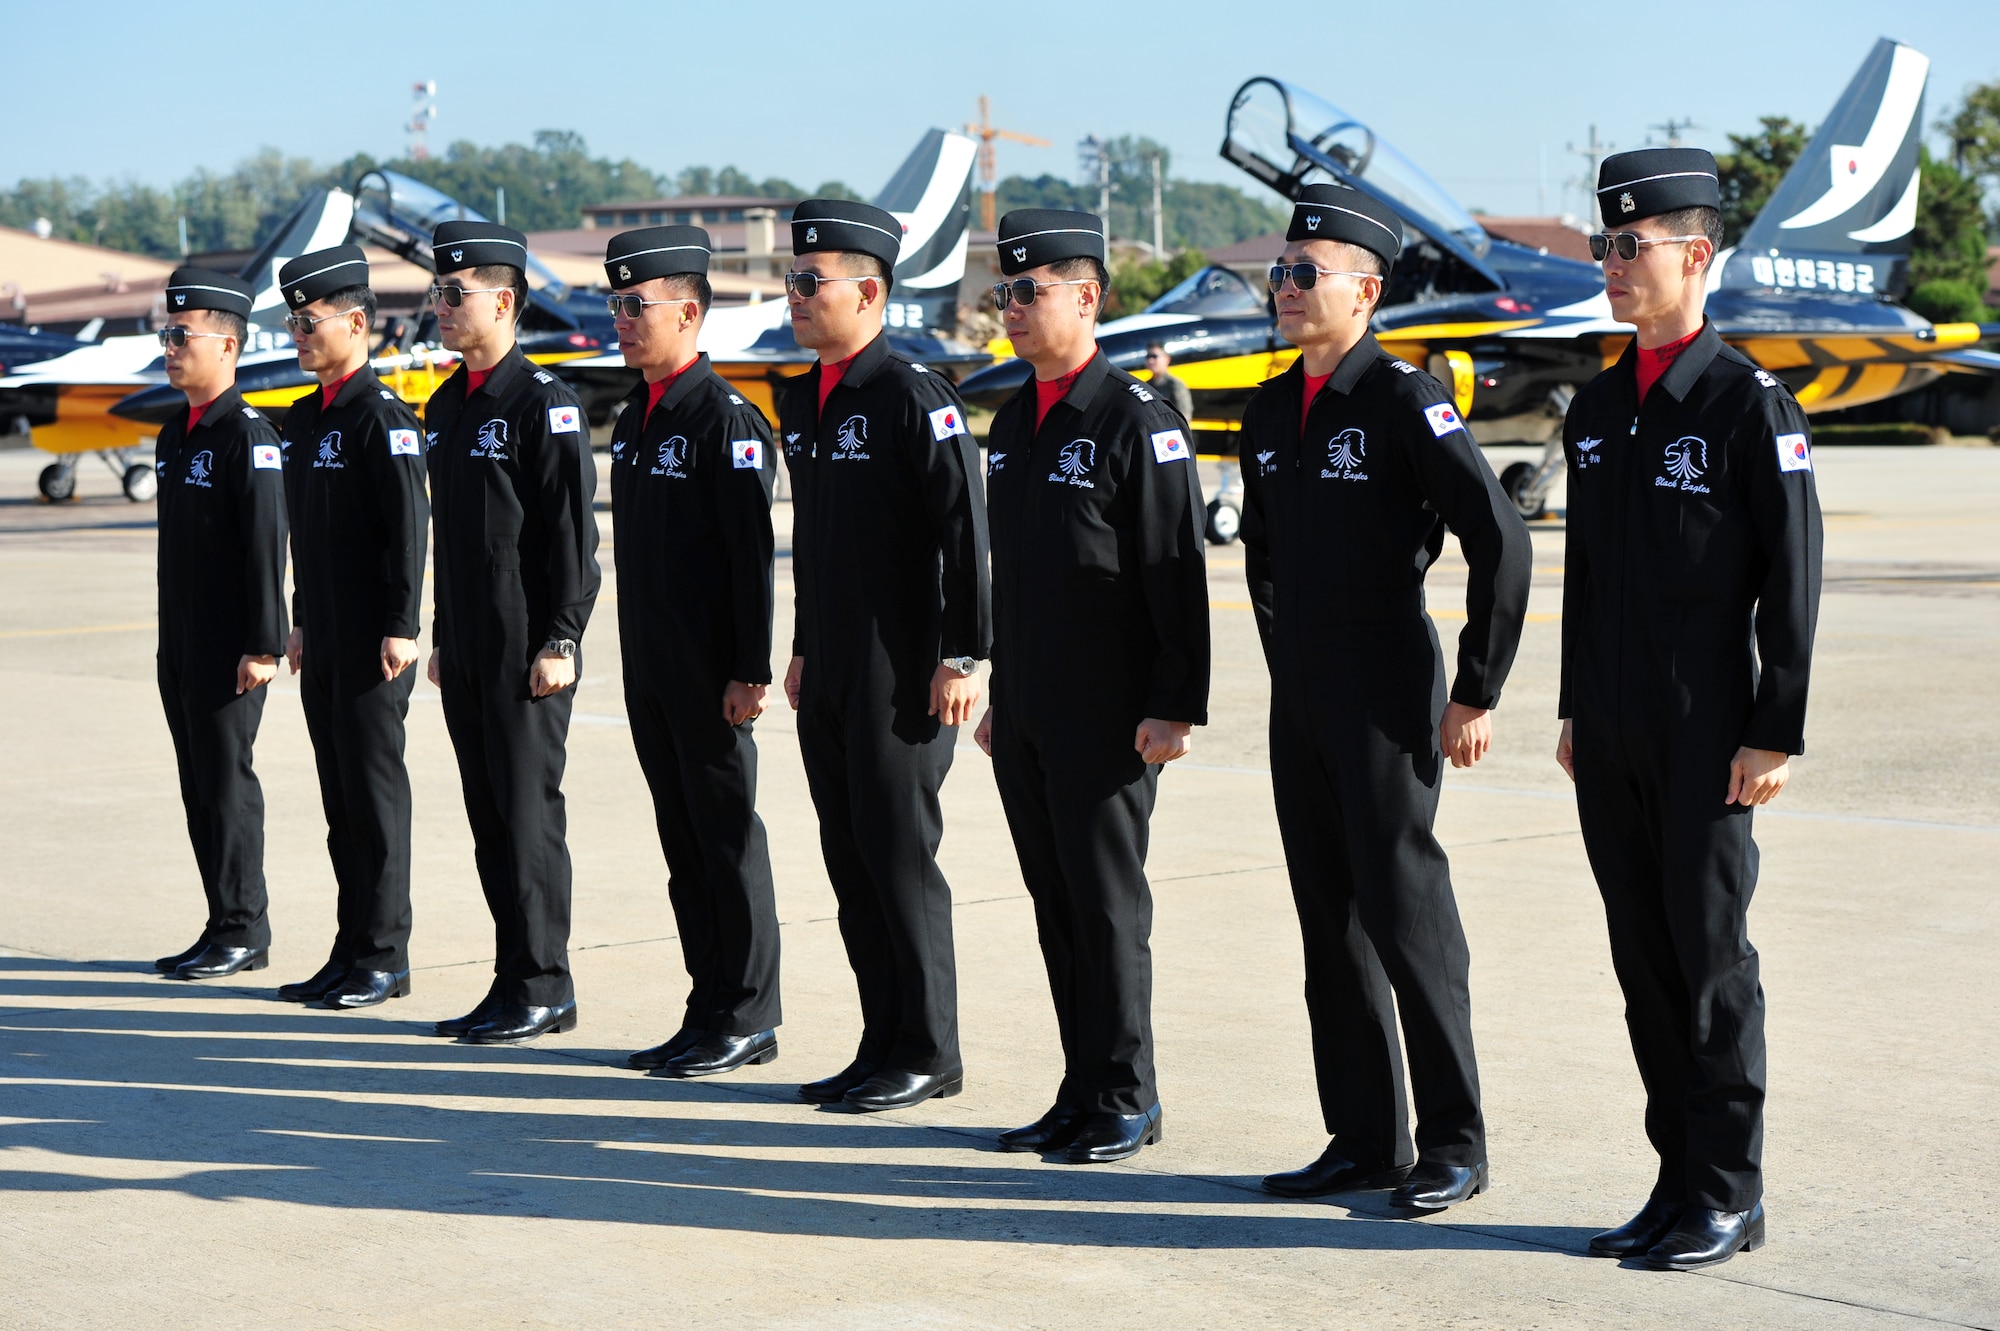 Pilots from the Republic of Korea’s aerial demonstration team, the Black Eagles, prepare for an airshow practice, Oct. 18, 2012, at Osan Air Base. The Black Eagles are preparing for Osan’s Air Power Day Oct. 20-21. 2012. (U.S. Air Force photo/Staff Sgt. Stefanie Torres)